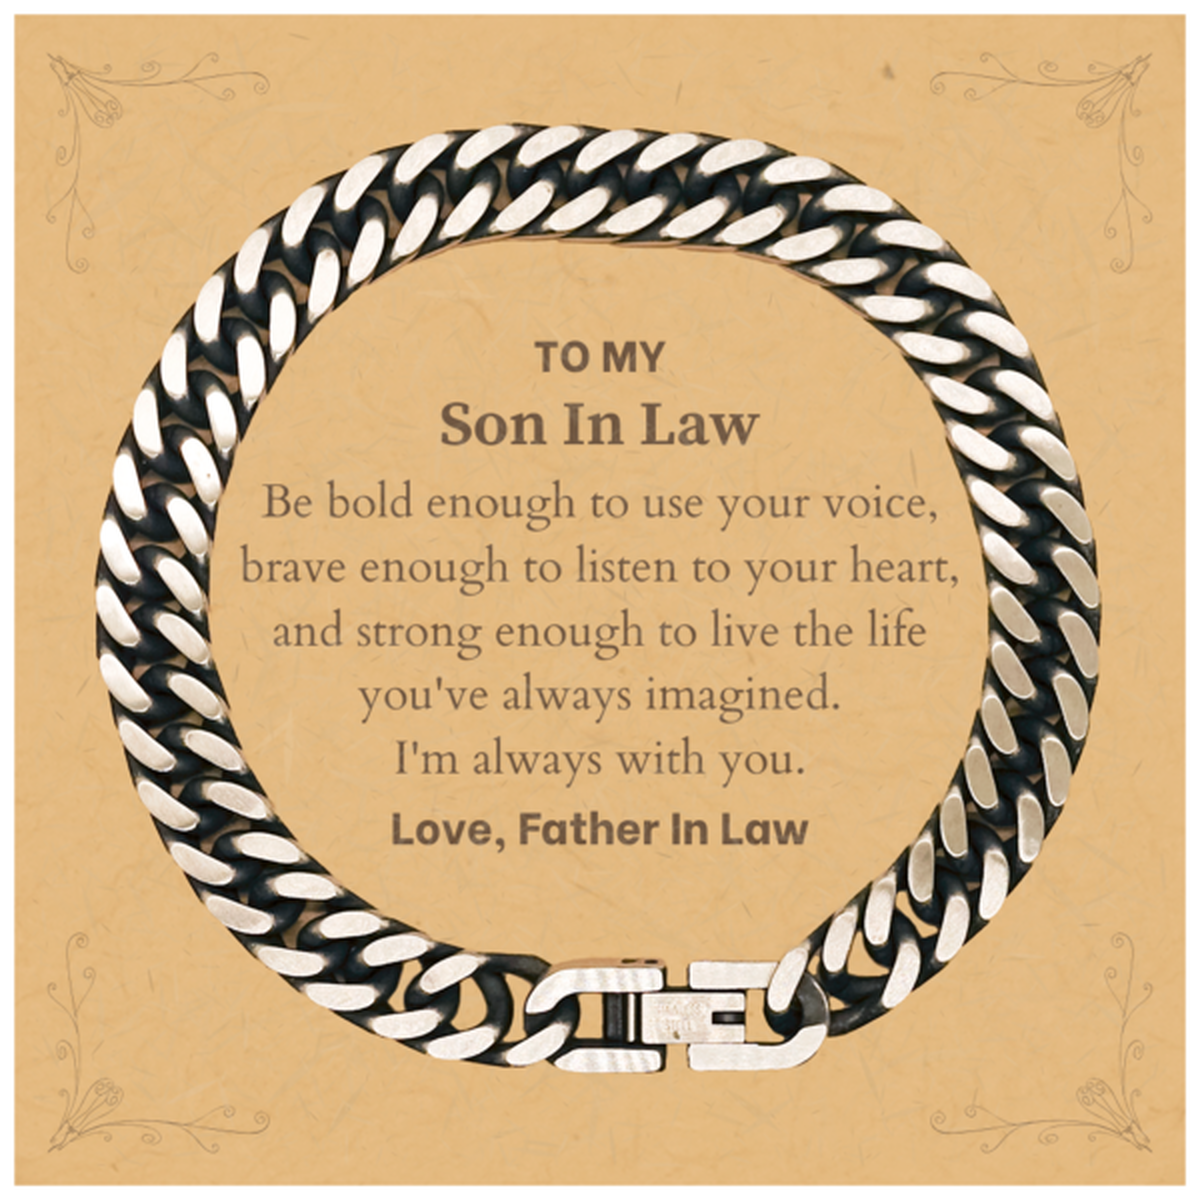 Keepsake Son In Law Cuban Link Chain Bracelet Gift Idea Graduation Christmas Birthday Son In Law from Father In Law, Son In Law Be bold enough to use your voice, brave enough to listen to your heart. Love, Father In Law